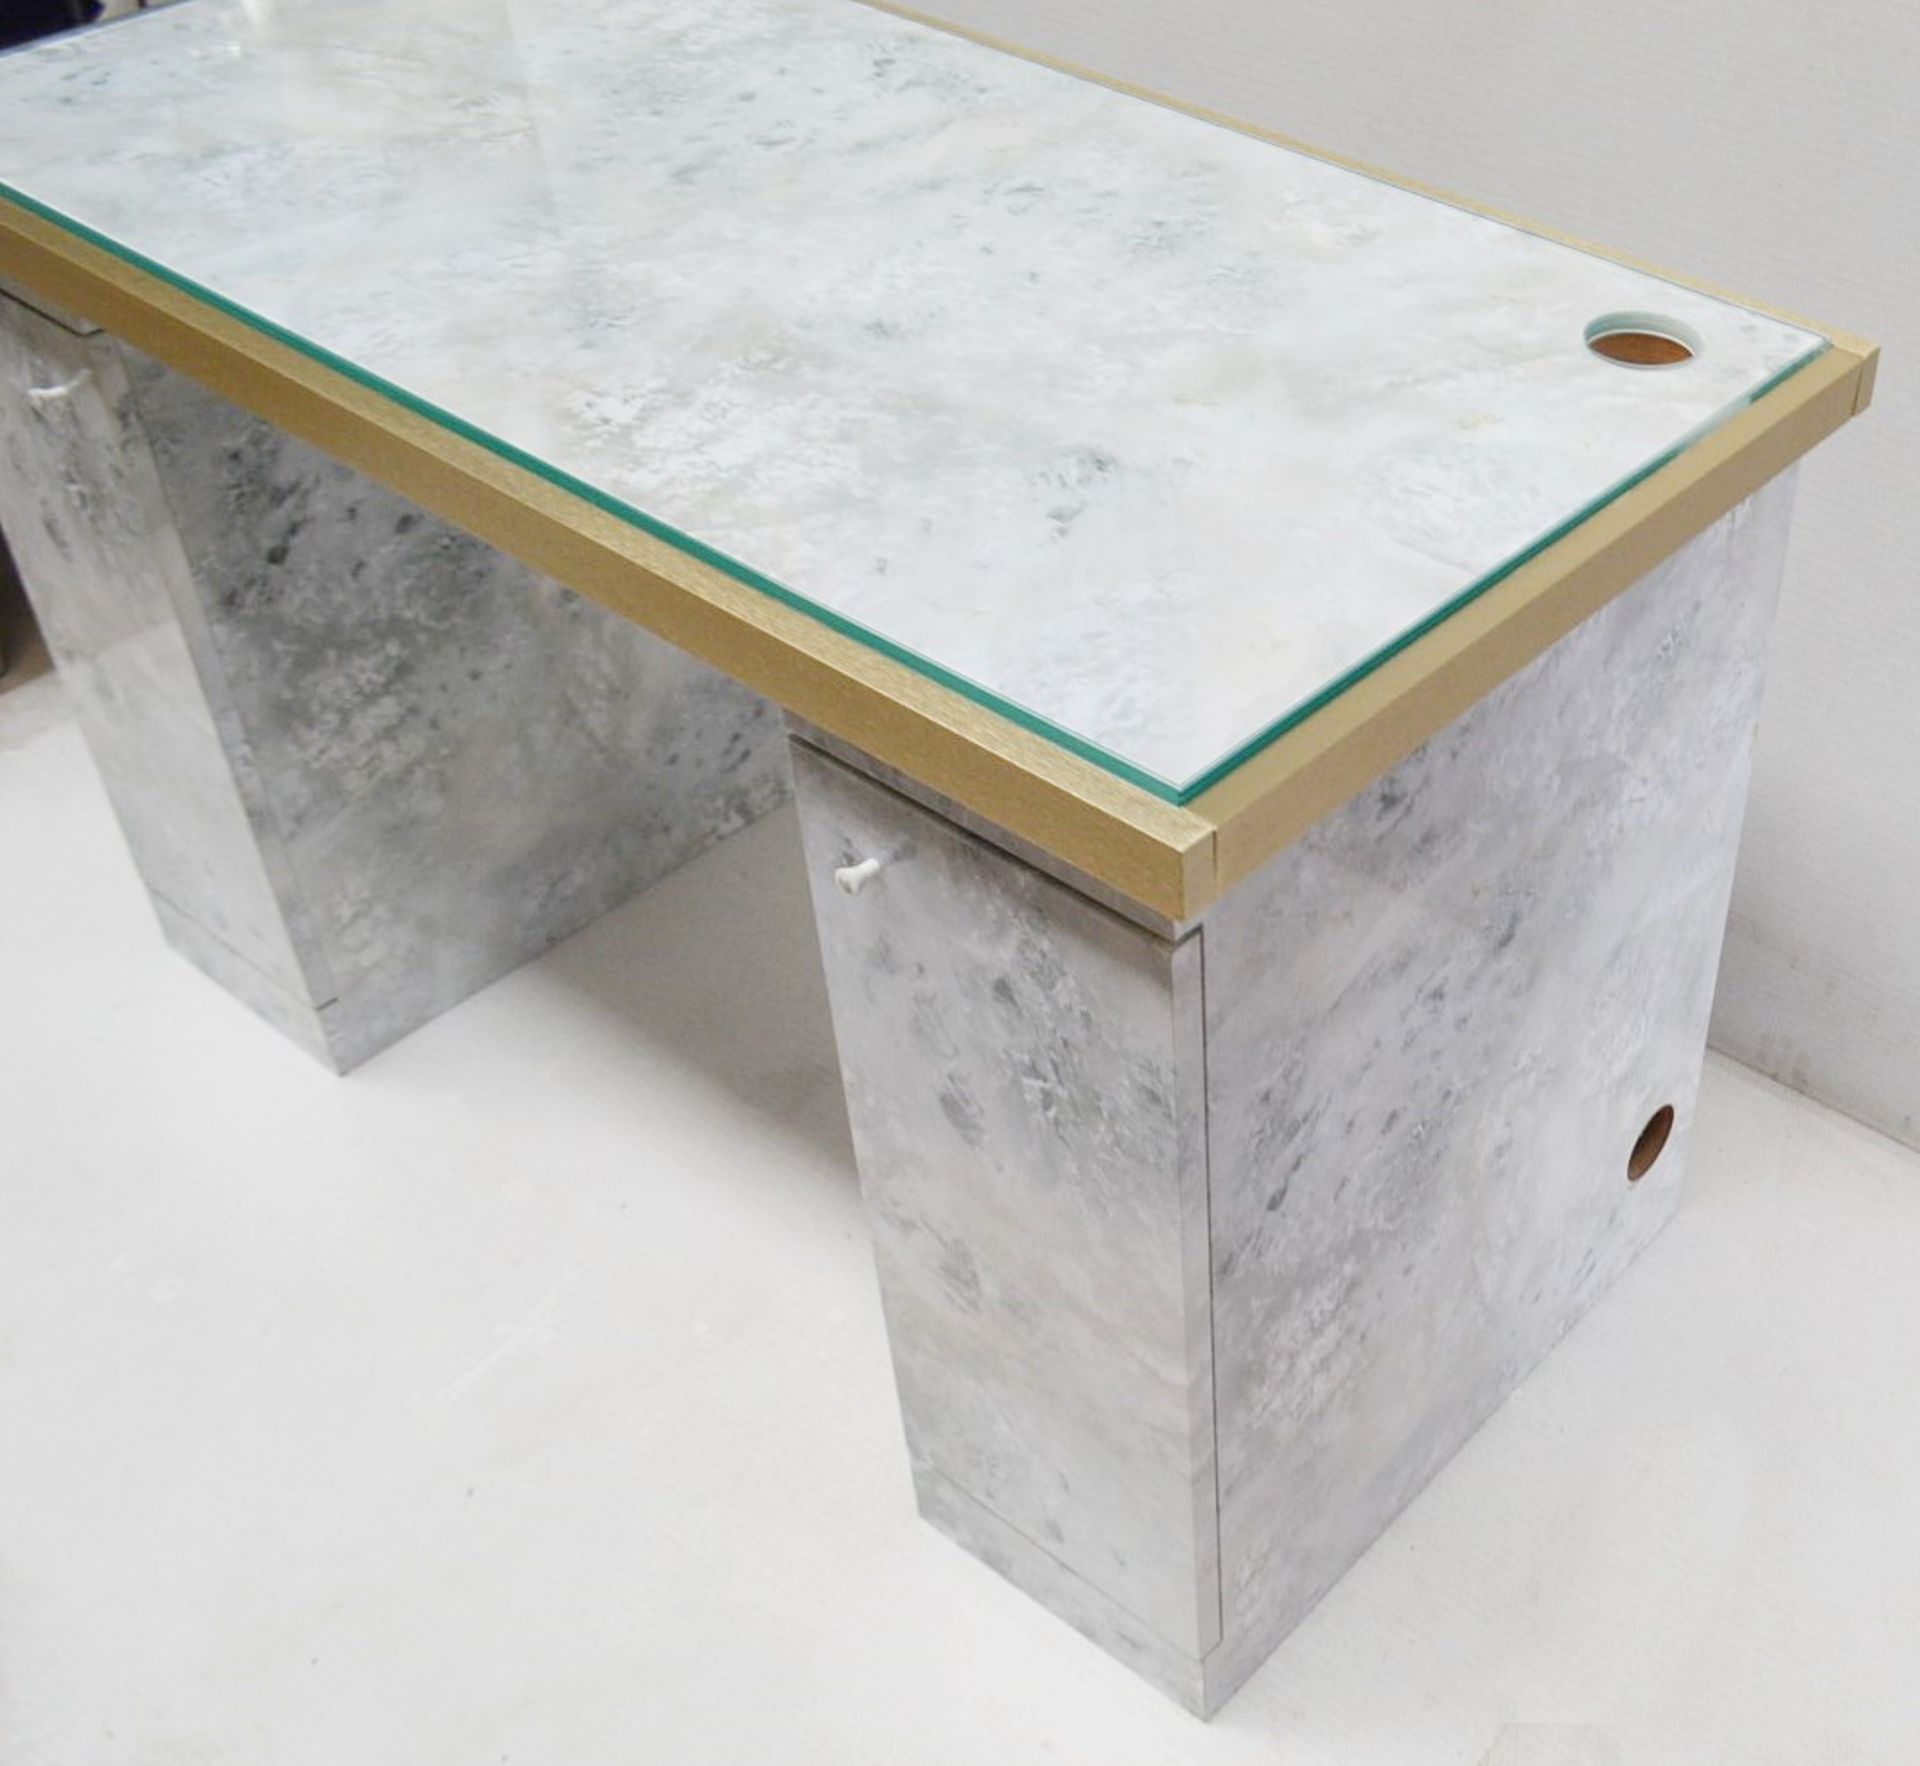 1 x BALDI Designer Retail Display Table / Desk Featuring A Marble Effect Aesthetic - Image 3 of 8